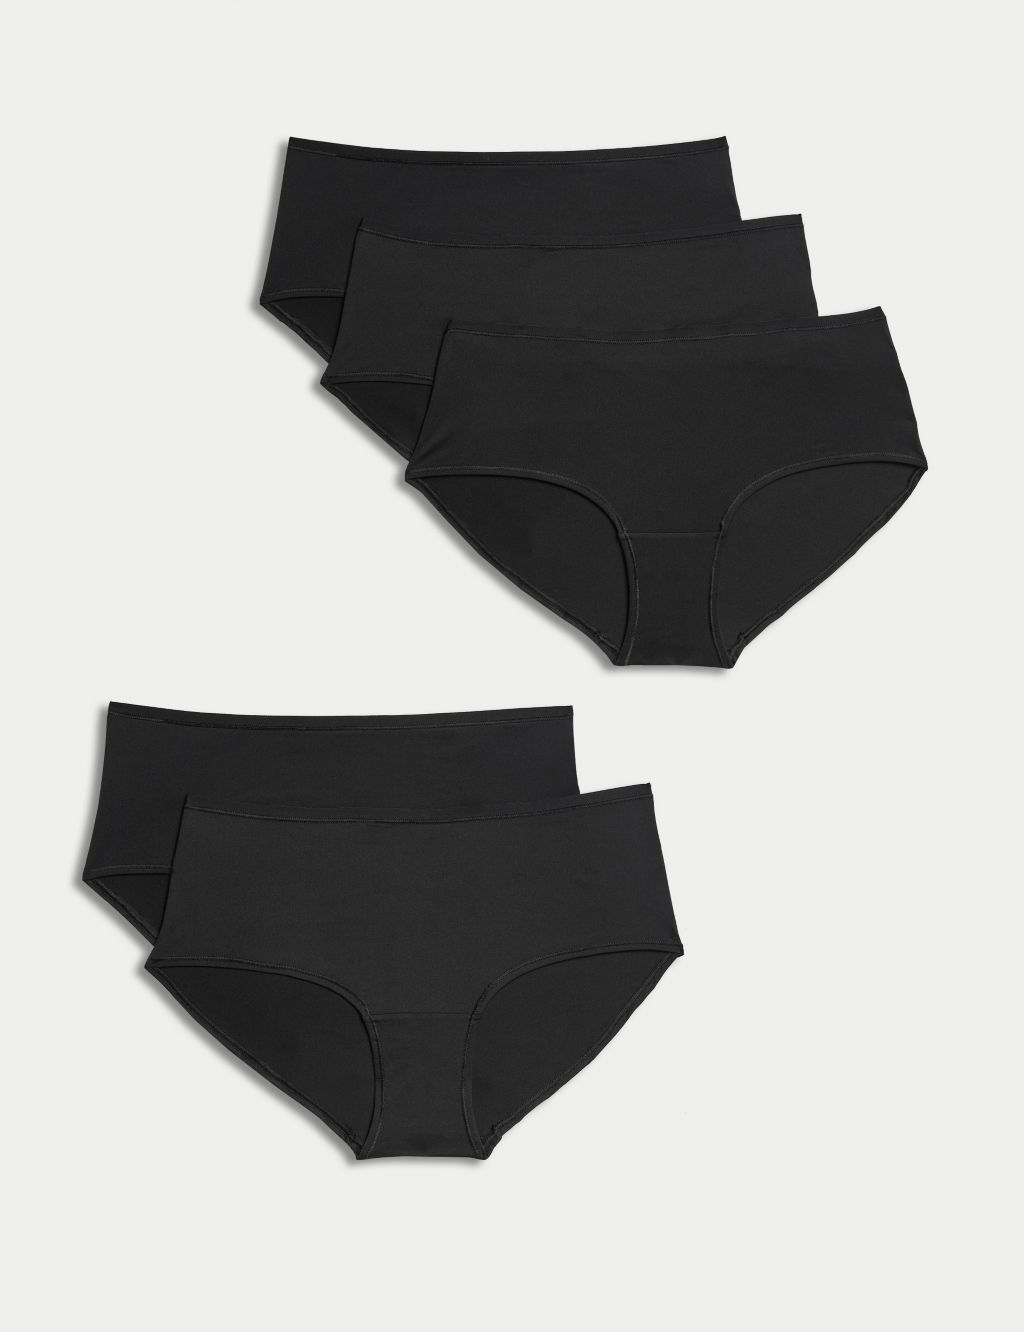 Bali Women's Double Support Brief 3-Pack, Black Soft Taupe, 6